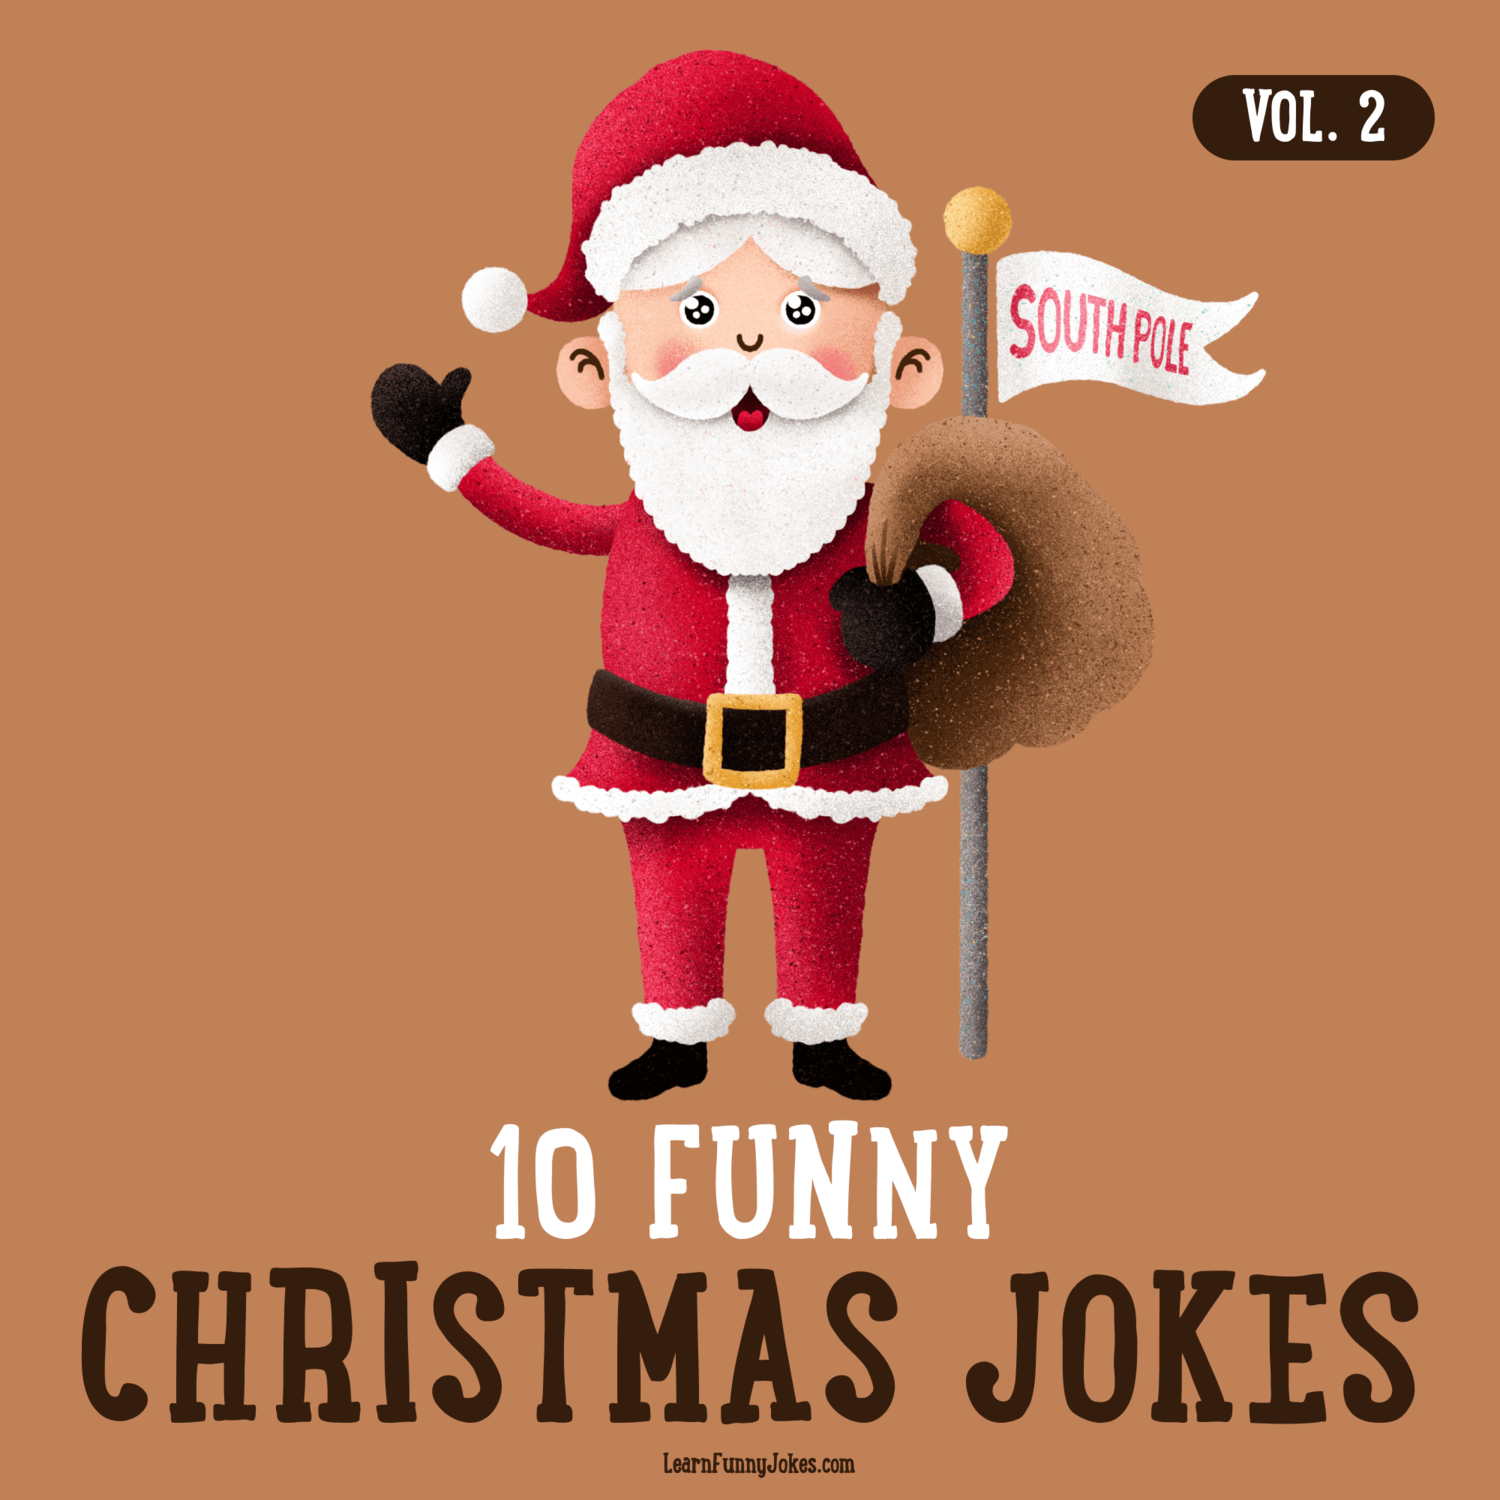 10 Funny Christmas Jokes - Christmas dad jokes you can tell your kids -  Volume 2 — Learn Funny Jokes